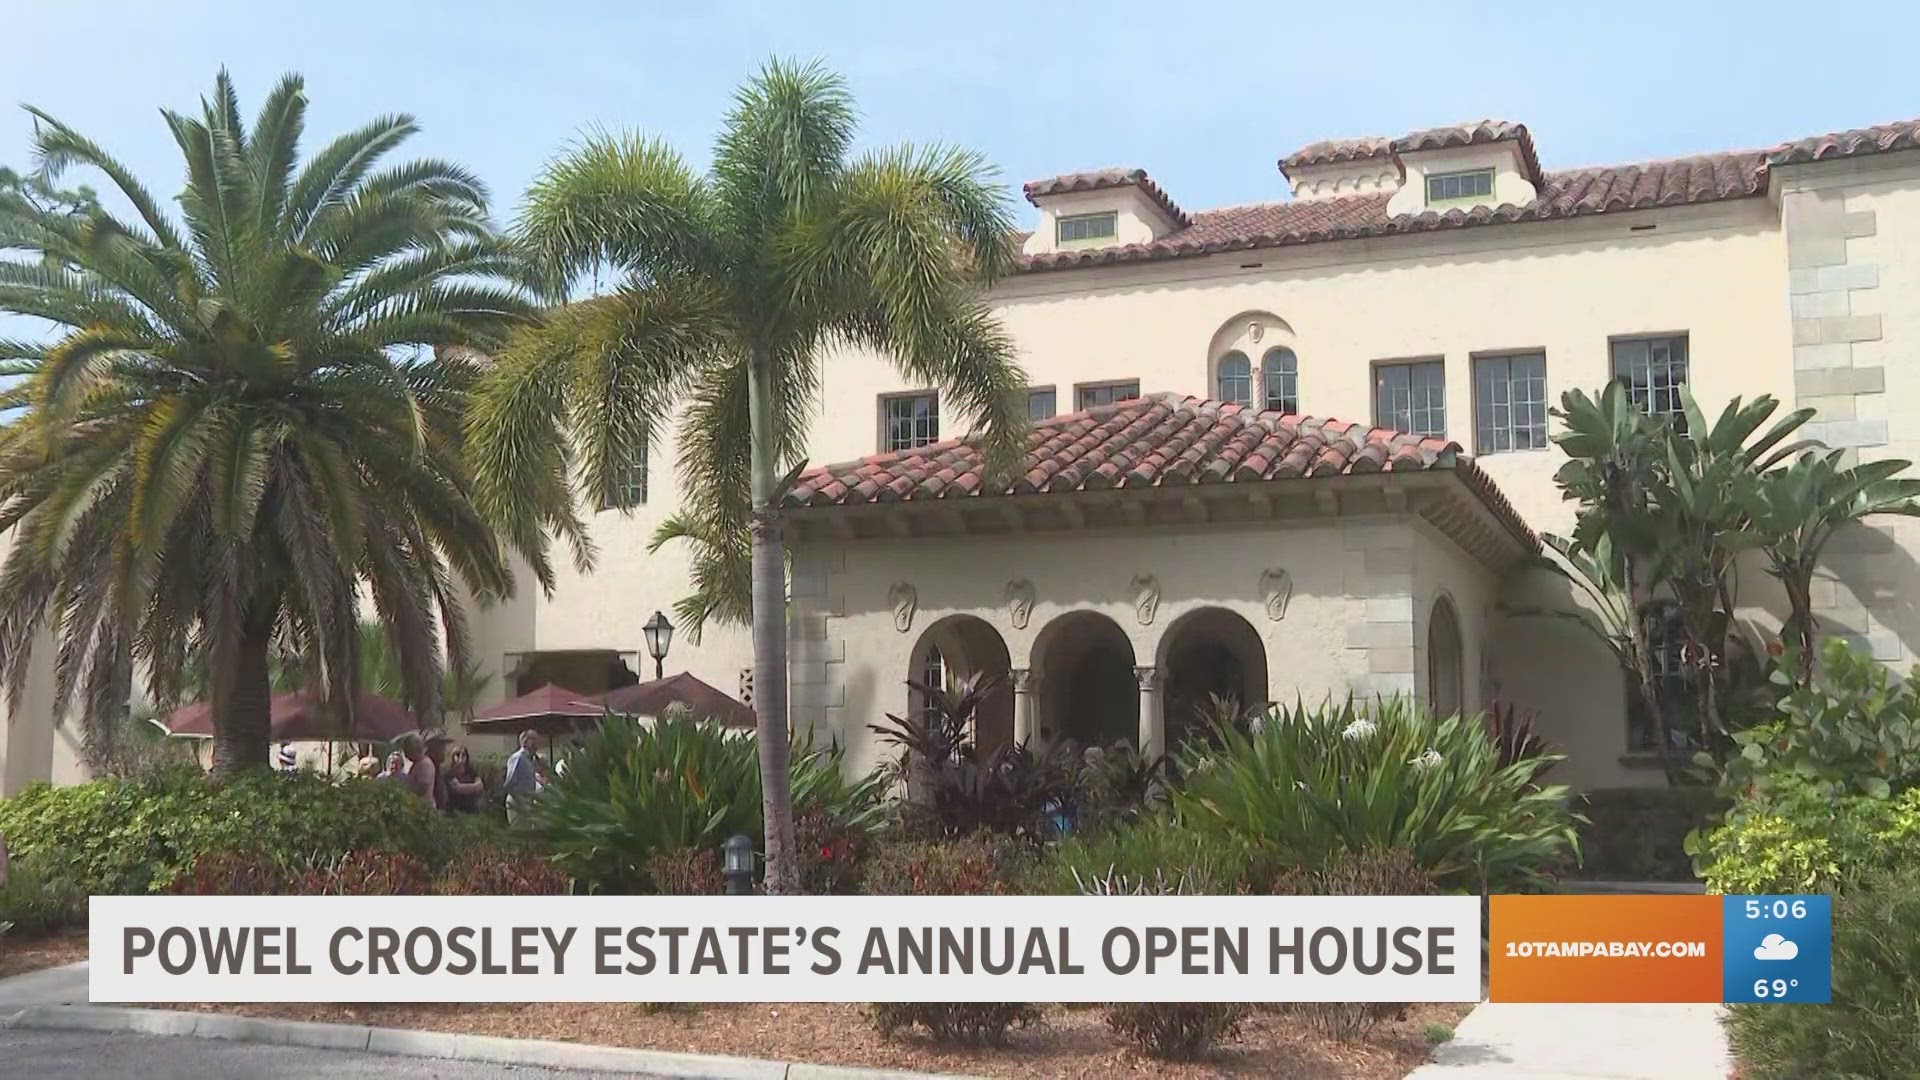 The mansion was the winter retreat for American inventor Powel Crosley Jr., built in 1930.